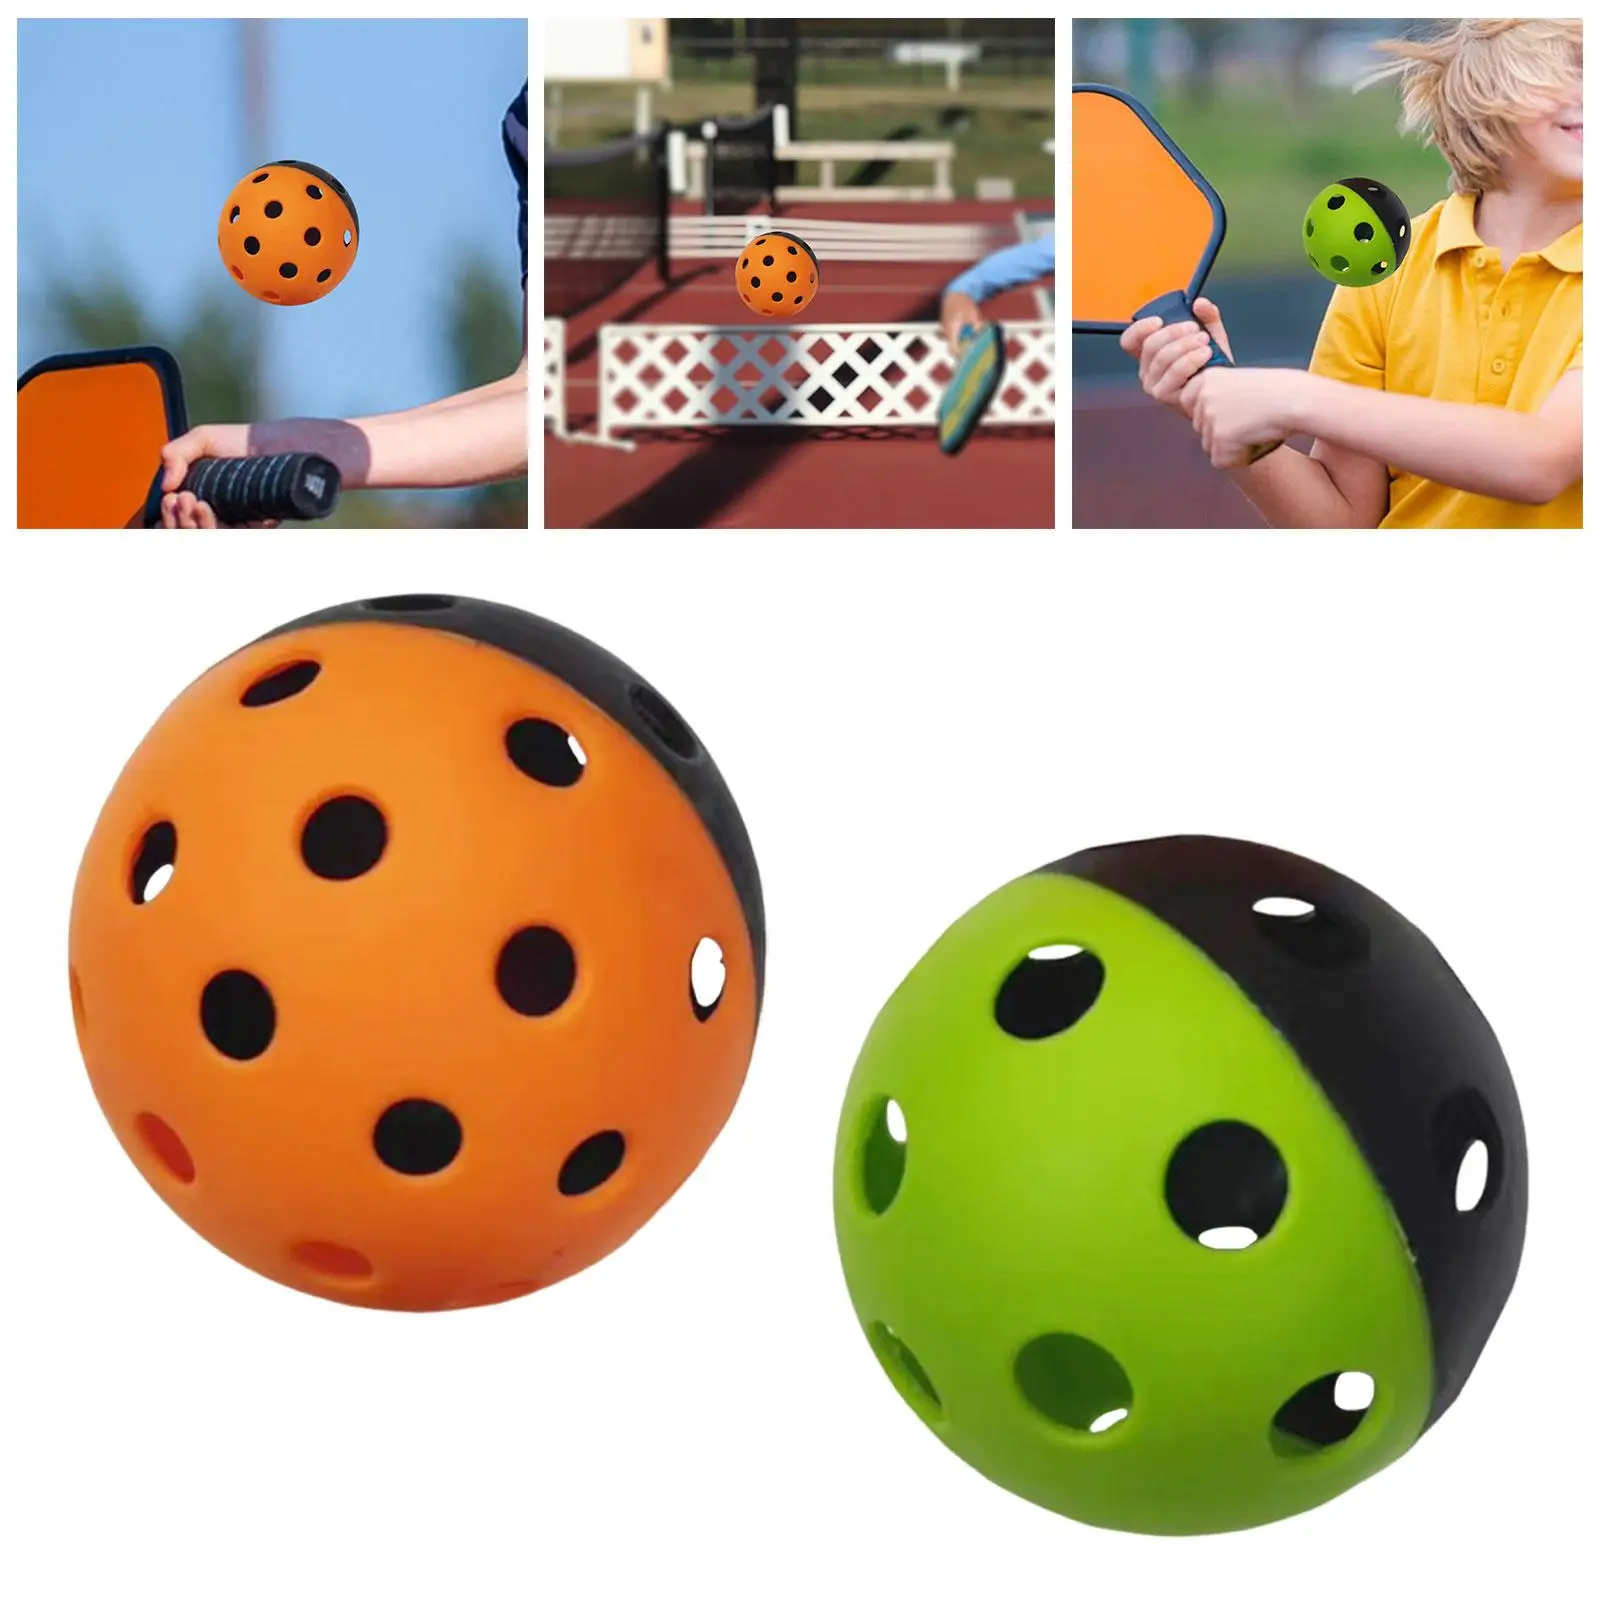 Pickleball Ball High Elastic 26 Holes Standard Golf Hollow Ball Pickle Balls for Outdoor Indoor Training Tournament Play Adult